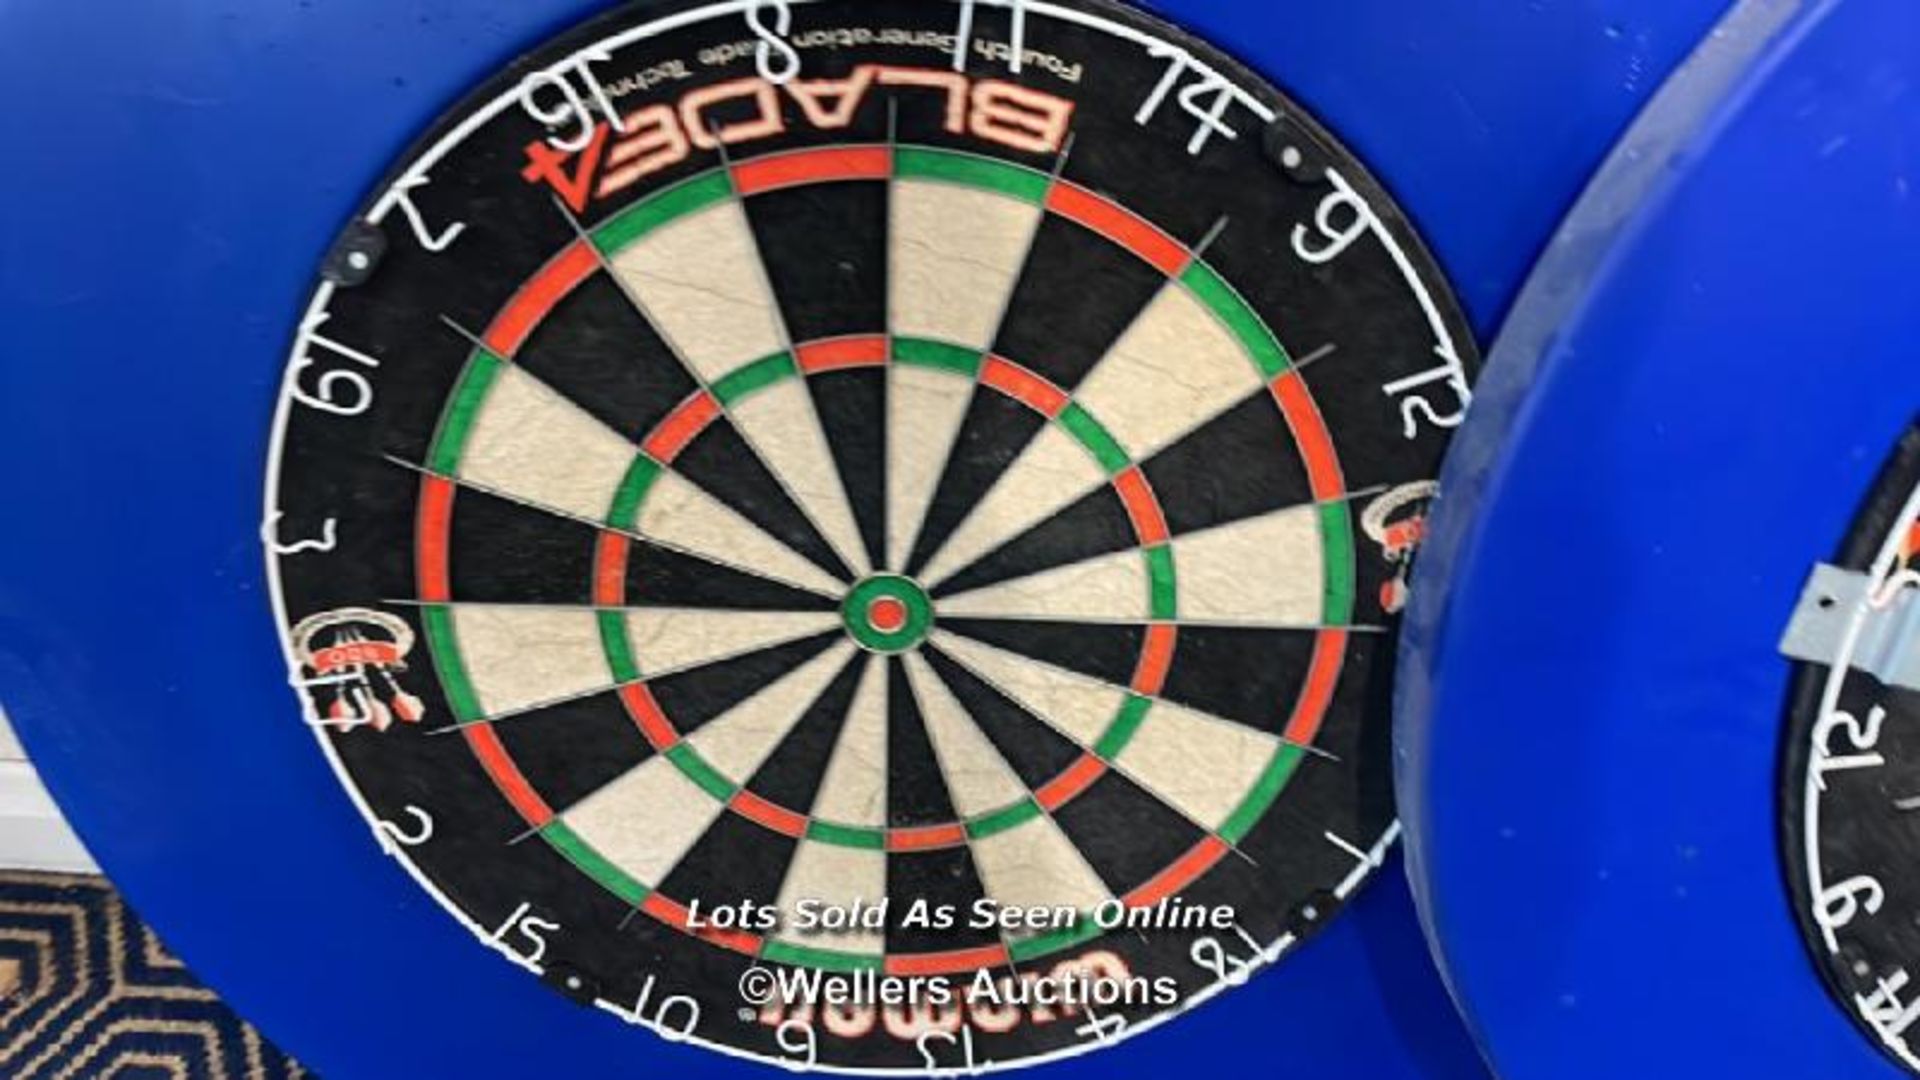 2X WINMAU BLADE 4 DART BOARDS WITH SURROUNDS / COLLECTION LOCATION: OLD WOKING DISTRICT - Image 2 of 3